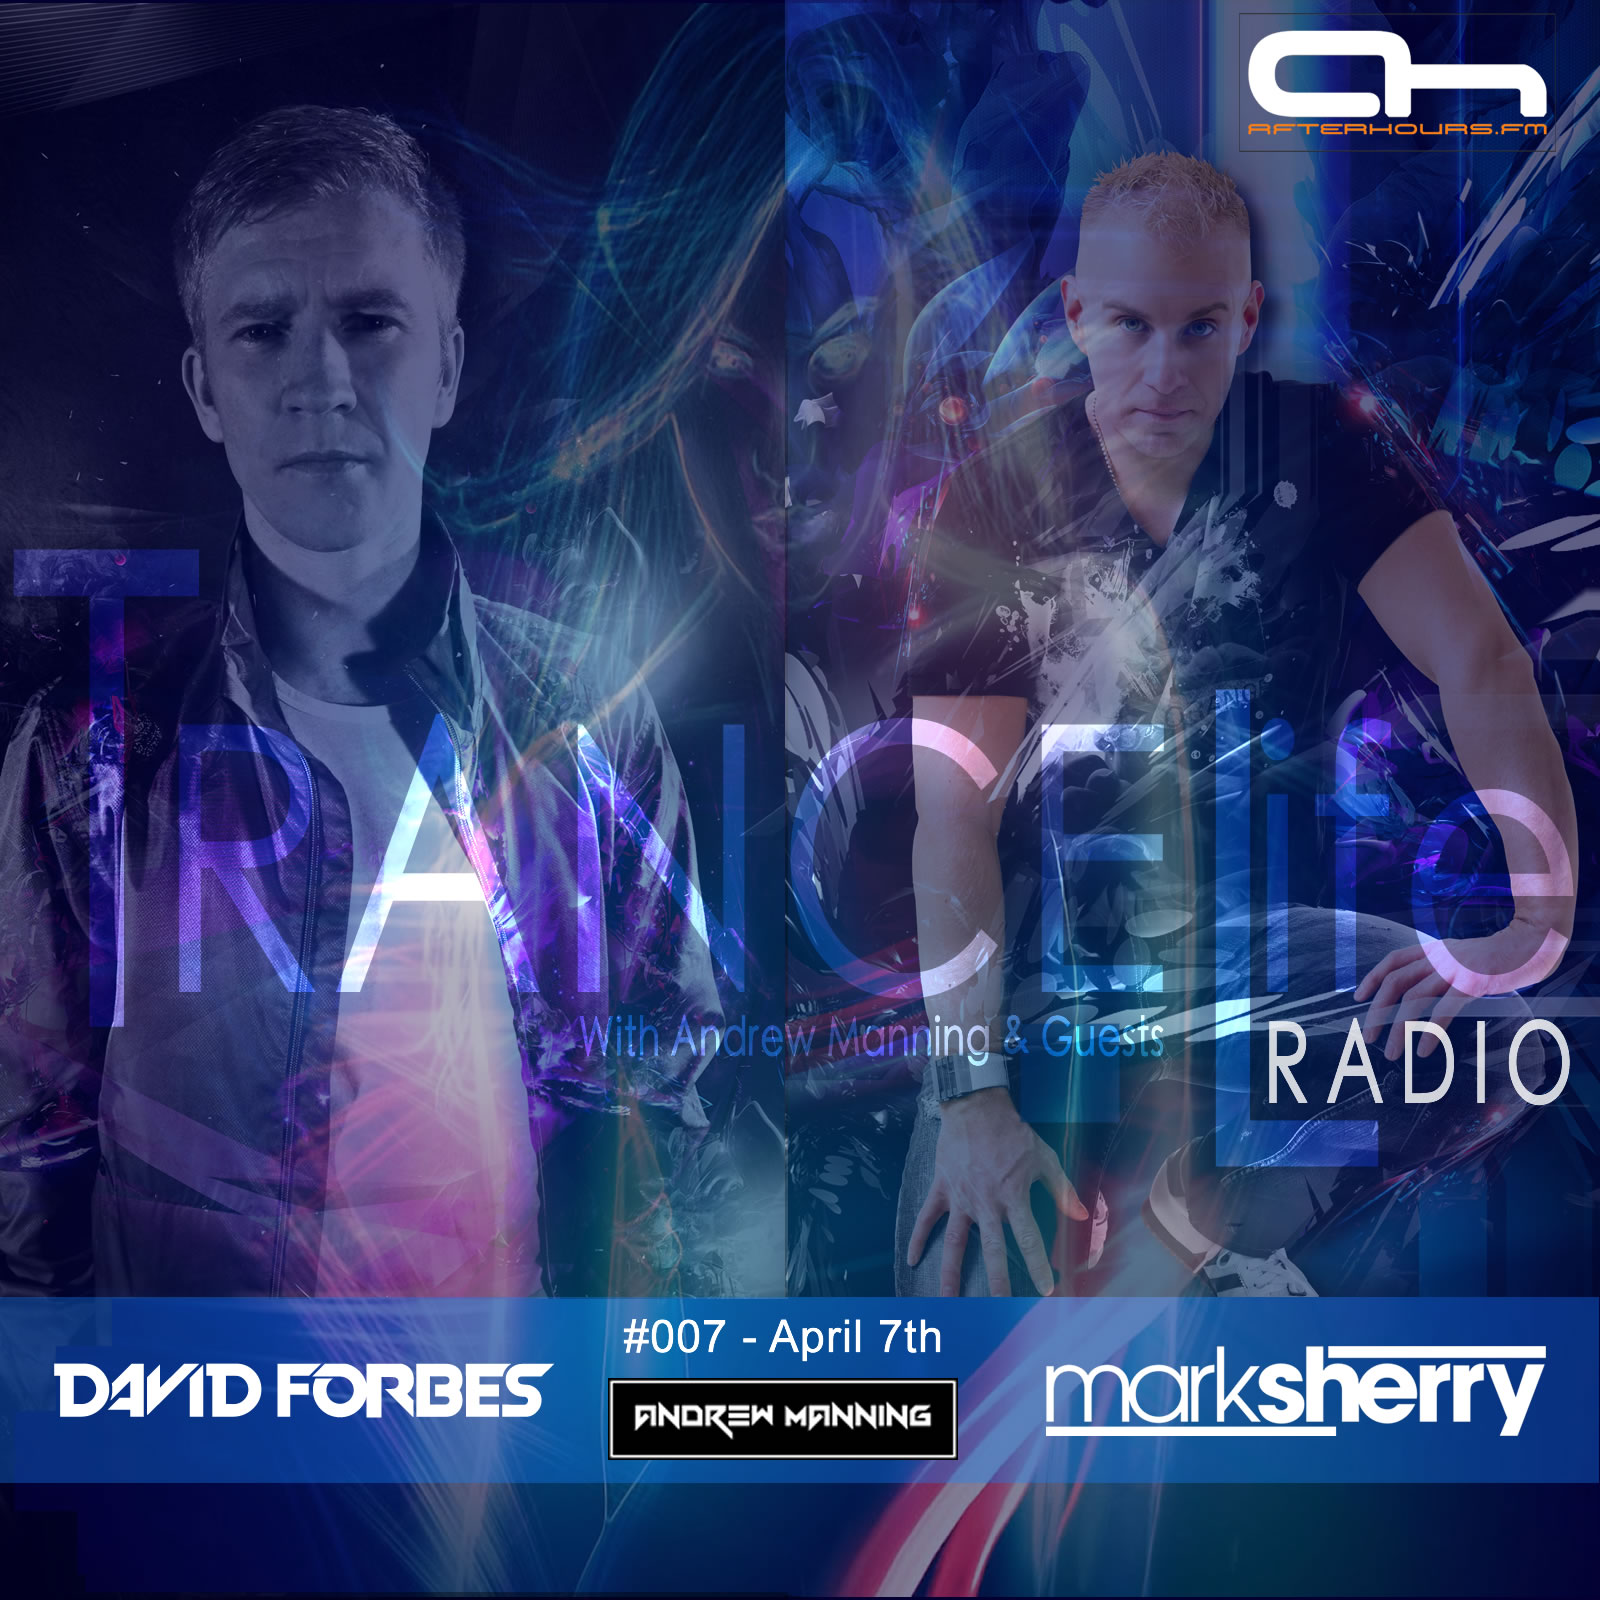 Andrew Manning - TranceLife Radio 007 - The 3 hour special with David Forbes and Mark Sherry